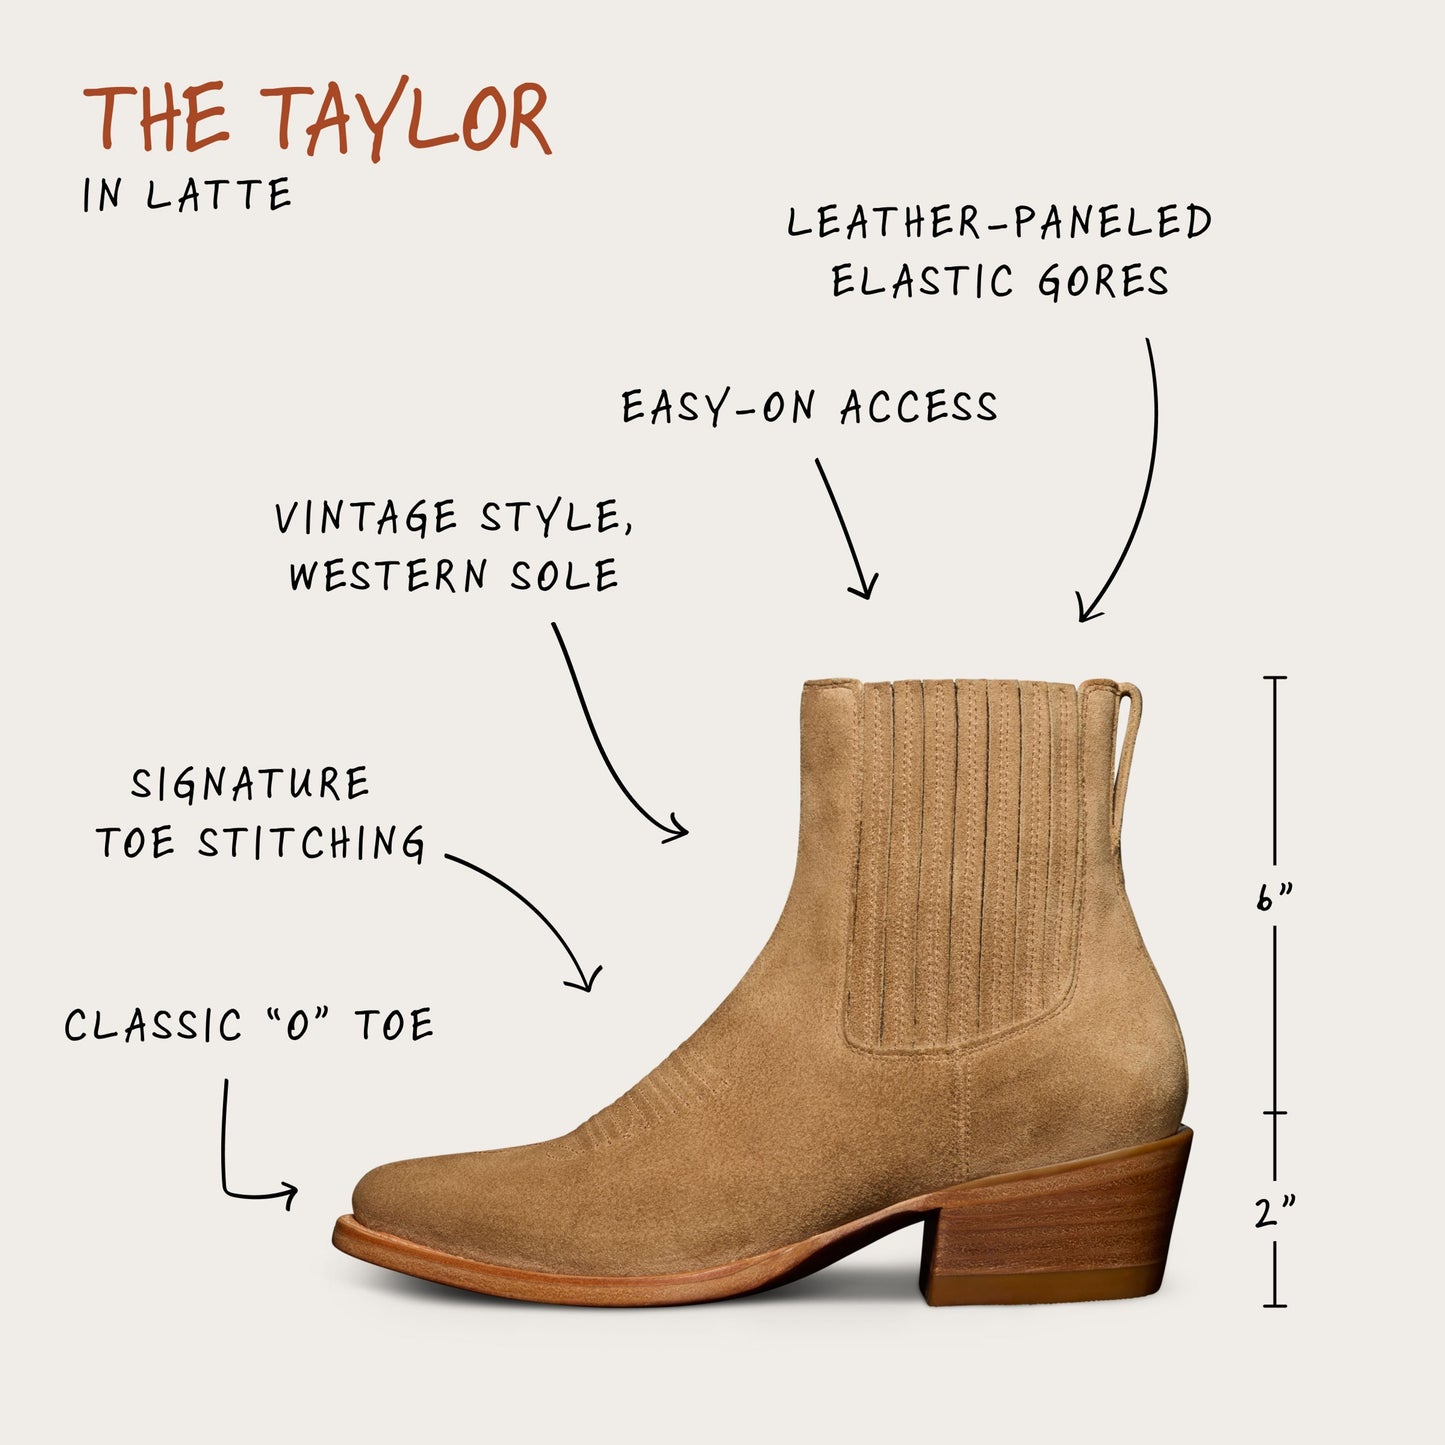 The Taylor Boot - Latte